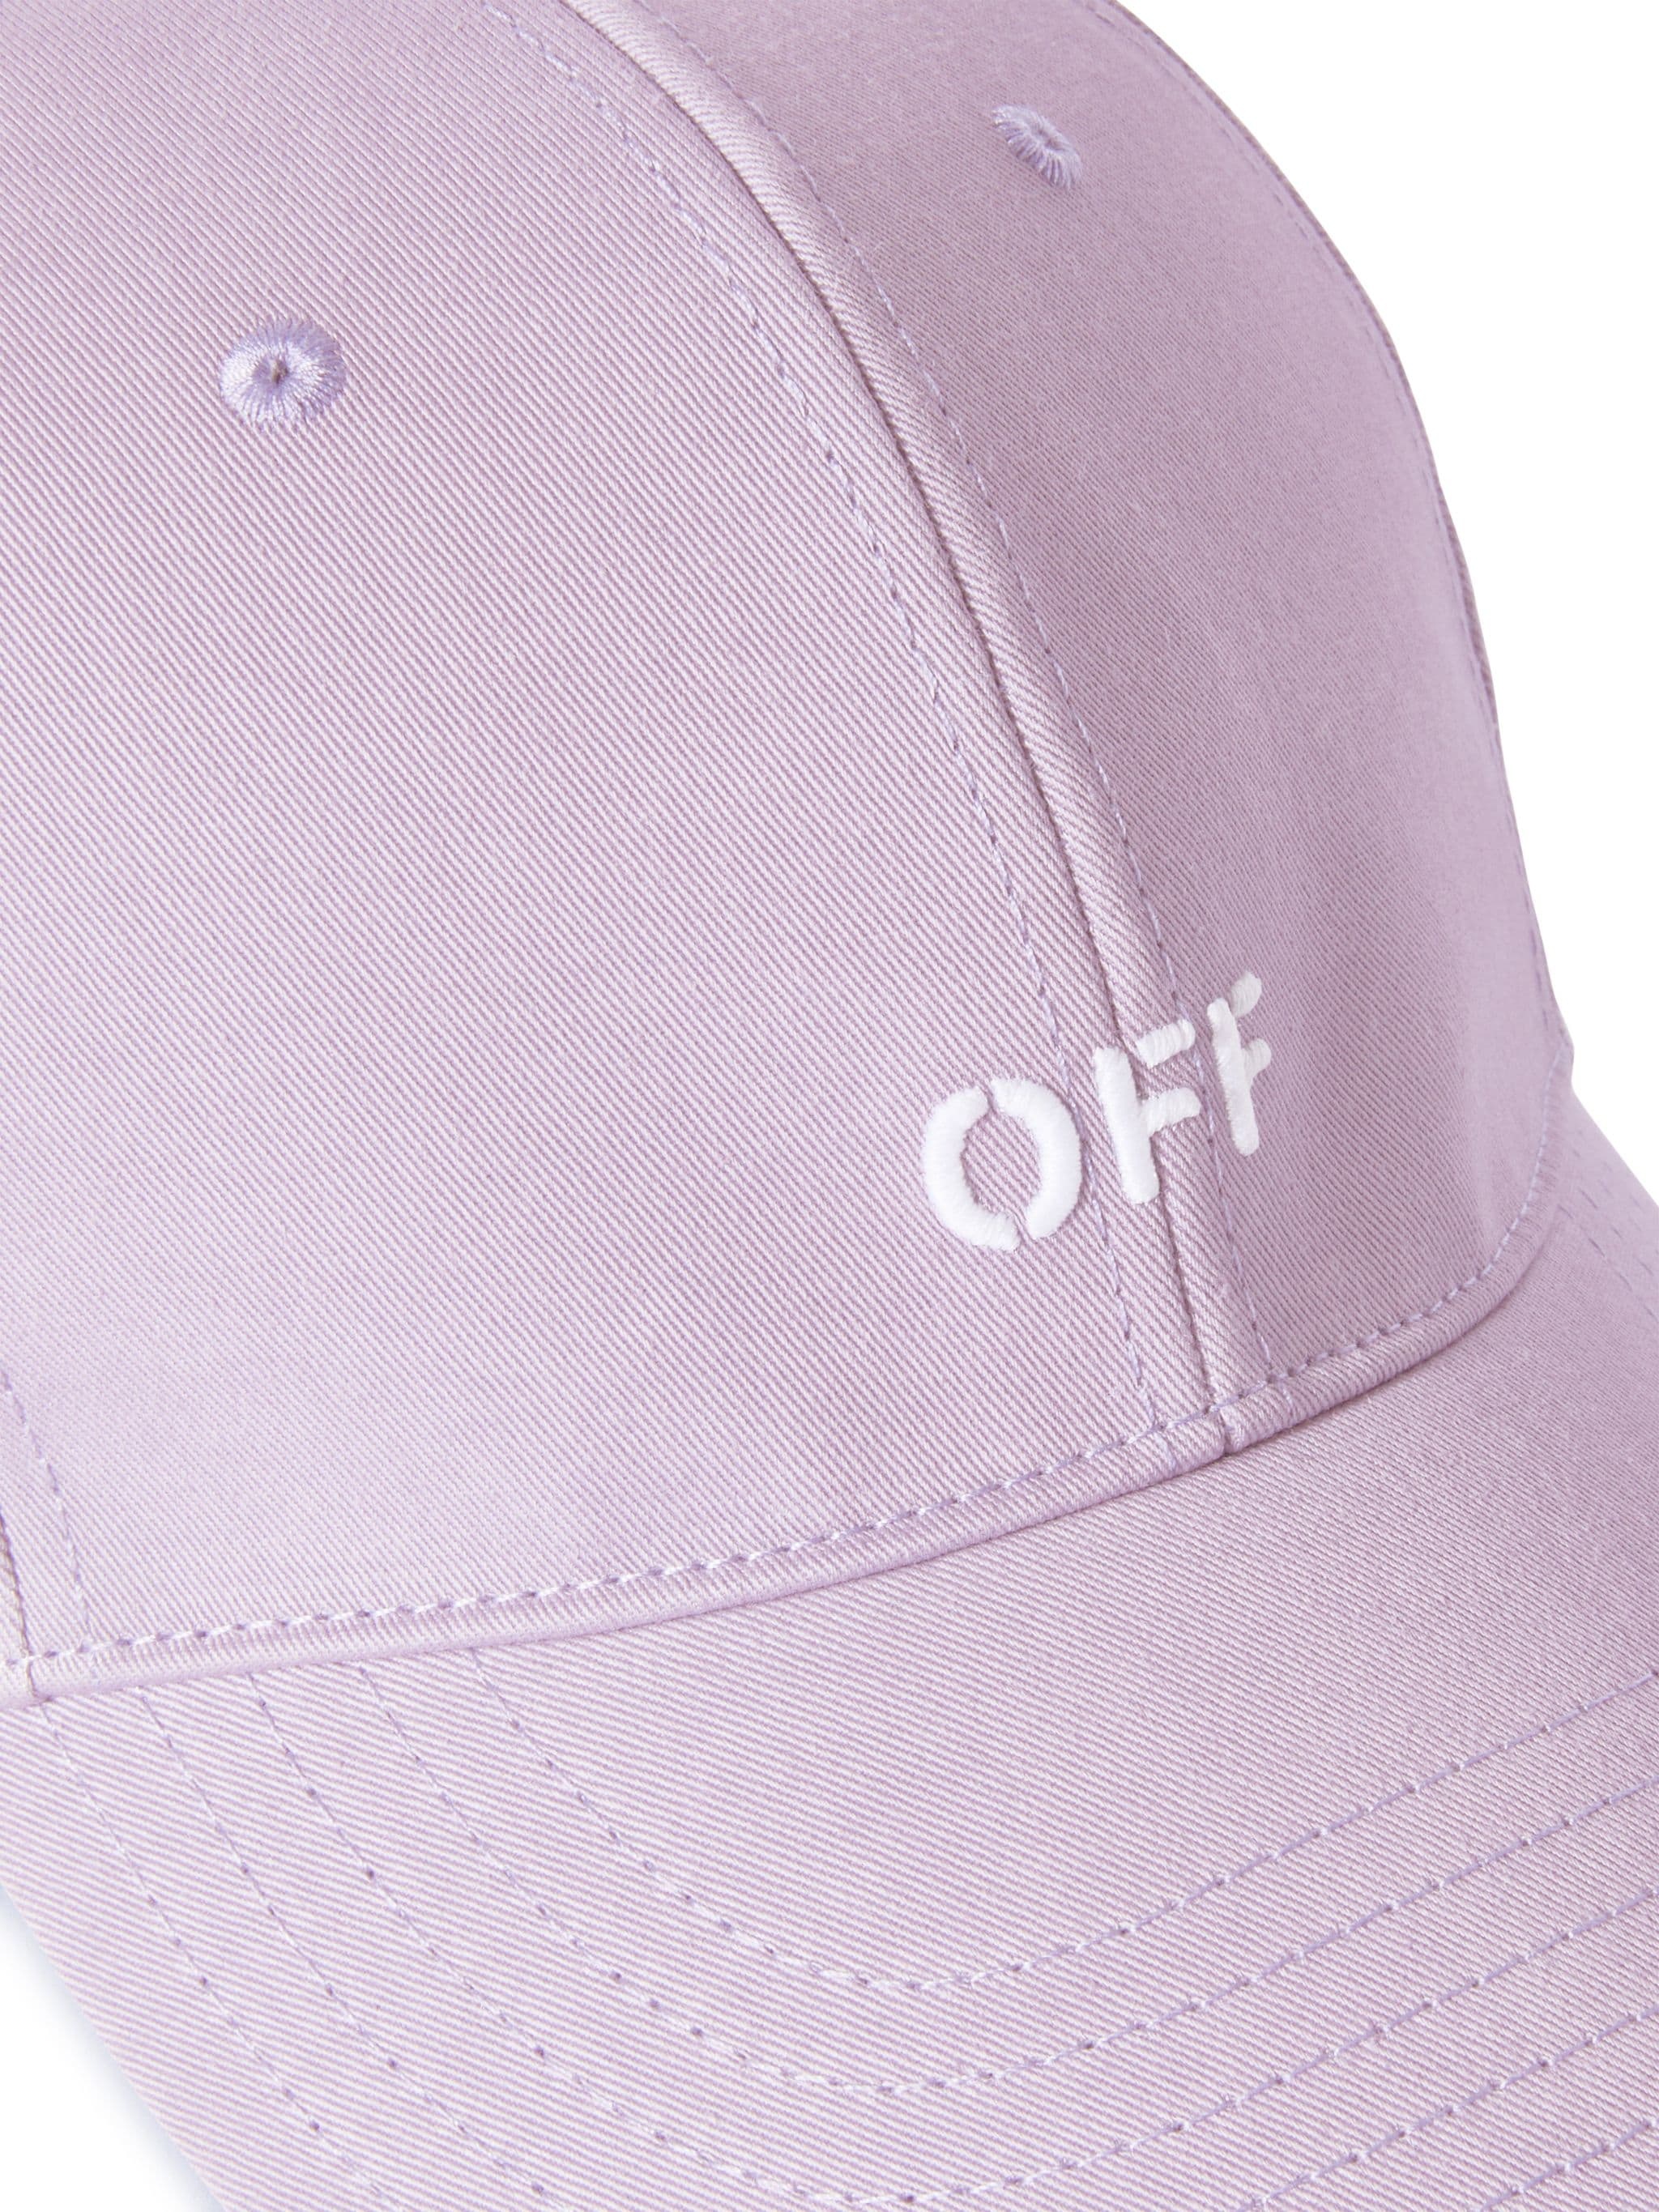 Drill Off Stamp Baseball Cap Lilac Whit - 3